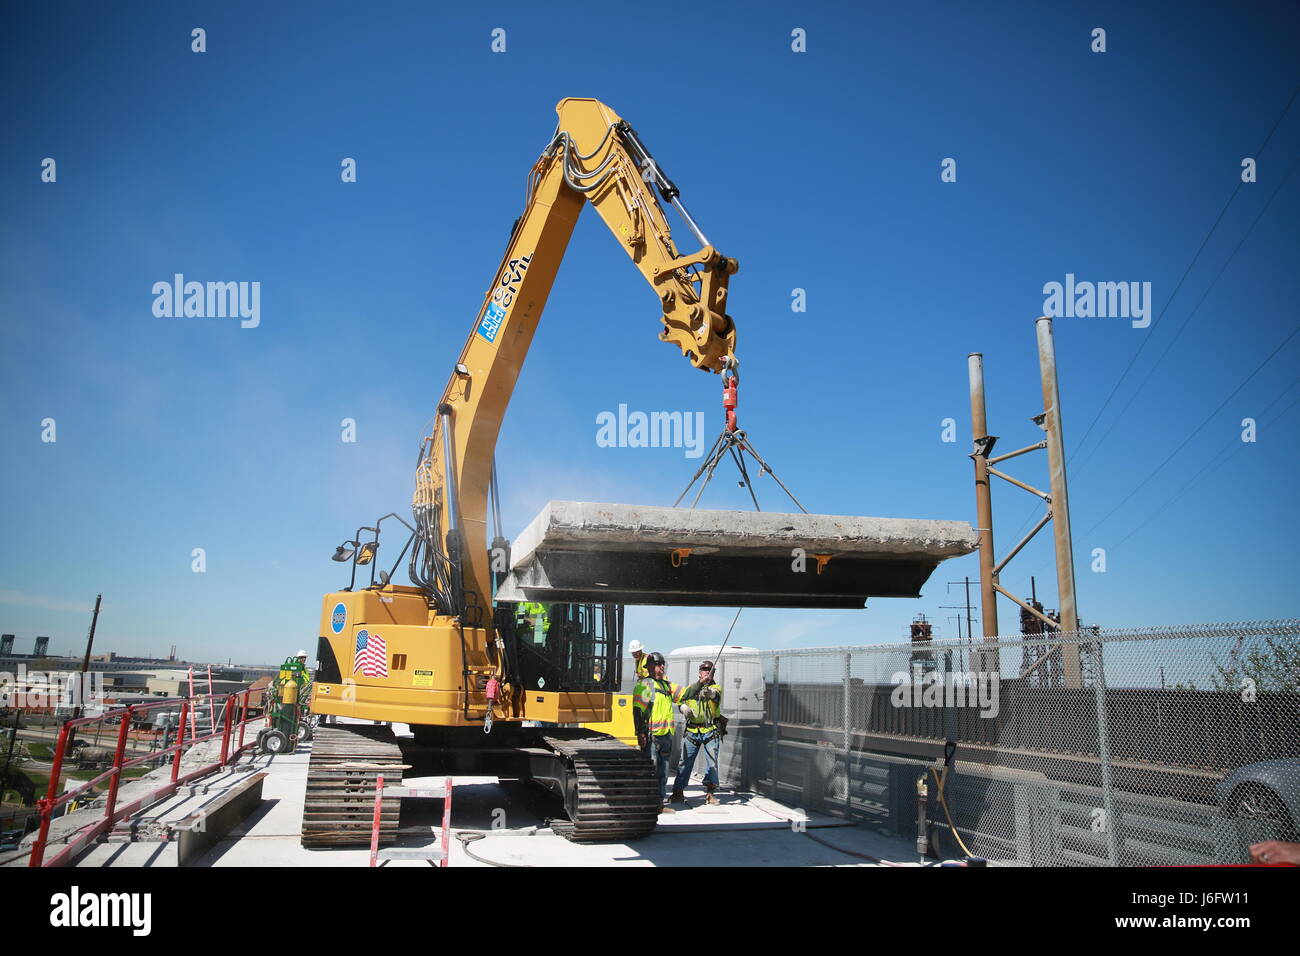 (170520) -- NEW YORK, May 20, 2017 (Xinhua) -- Photo taken on May 5, 2014 shows workers of China Construction America working at the construction site of the rehabilitating project of Pulaski Skyway project in New Jersey, the United States. China Construction America, a Chinese construction company, started its business in the United States in 2000 with only 12 employees and less than 10 million dollars of annual revenue. In 2016, it employed around 2,000 workers, 98 percent of whom are Americans. Its revenue jumped to 2 billion dollars. Foreign Direct Investment (FDI) between China and United Stock Photo